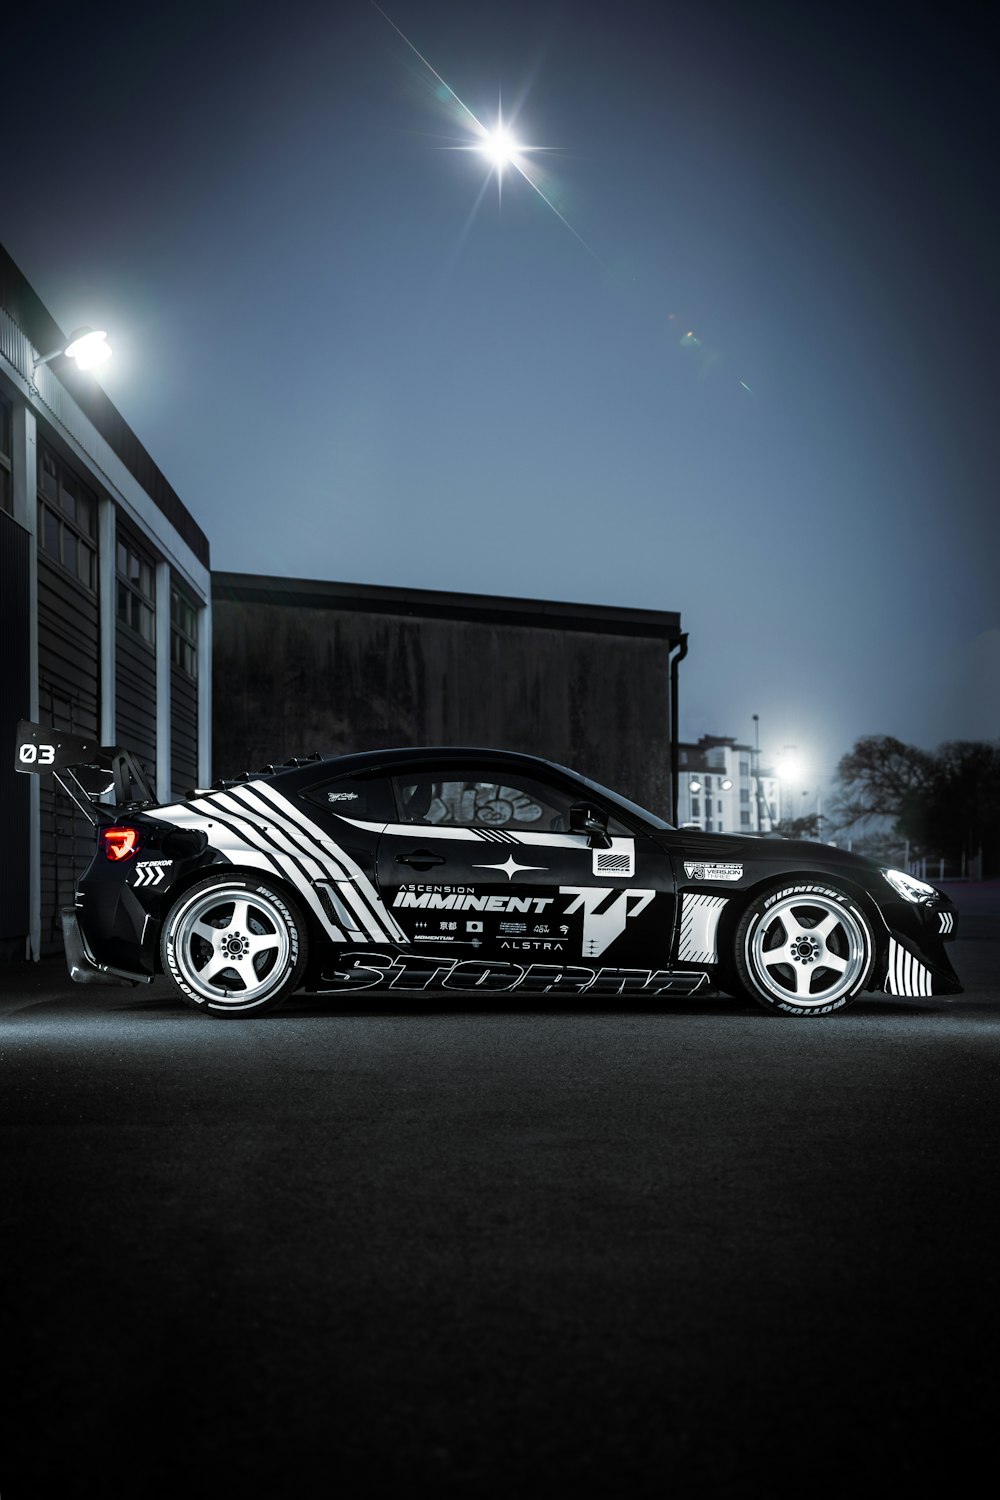 a black sports car parked on a street at night